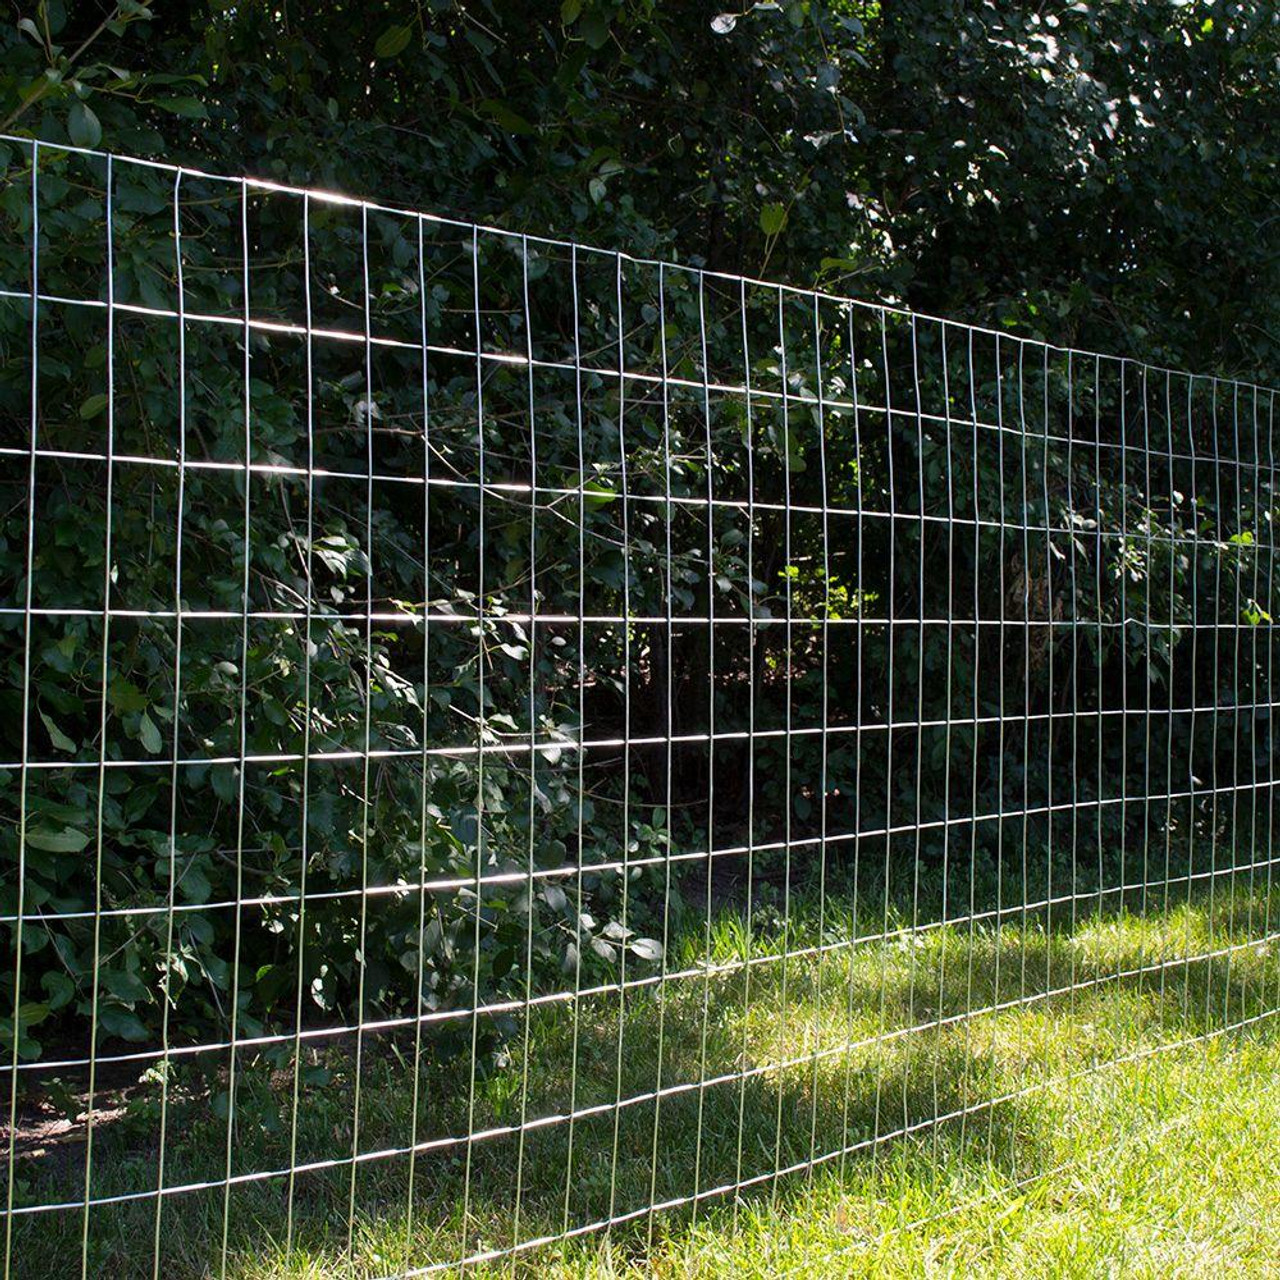 Fencer Wire 14 Gauge Galvanized Welded Wire Mesh Size 2 inch by 4 inch, 5 ft. x 50 ft.